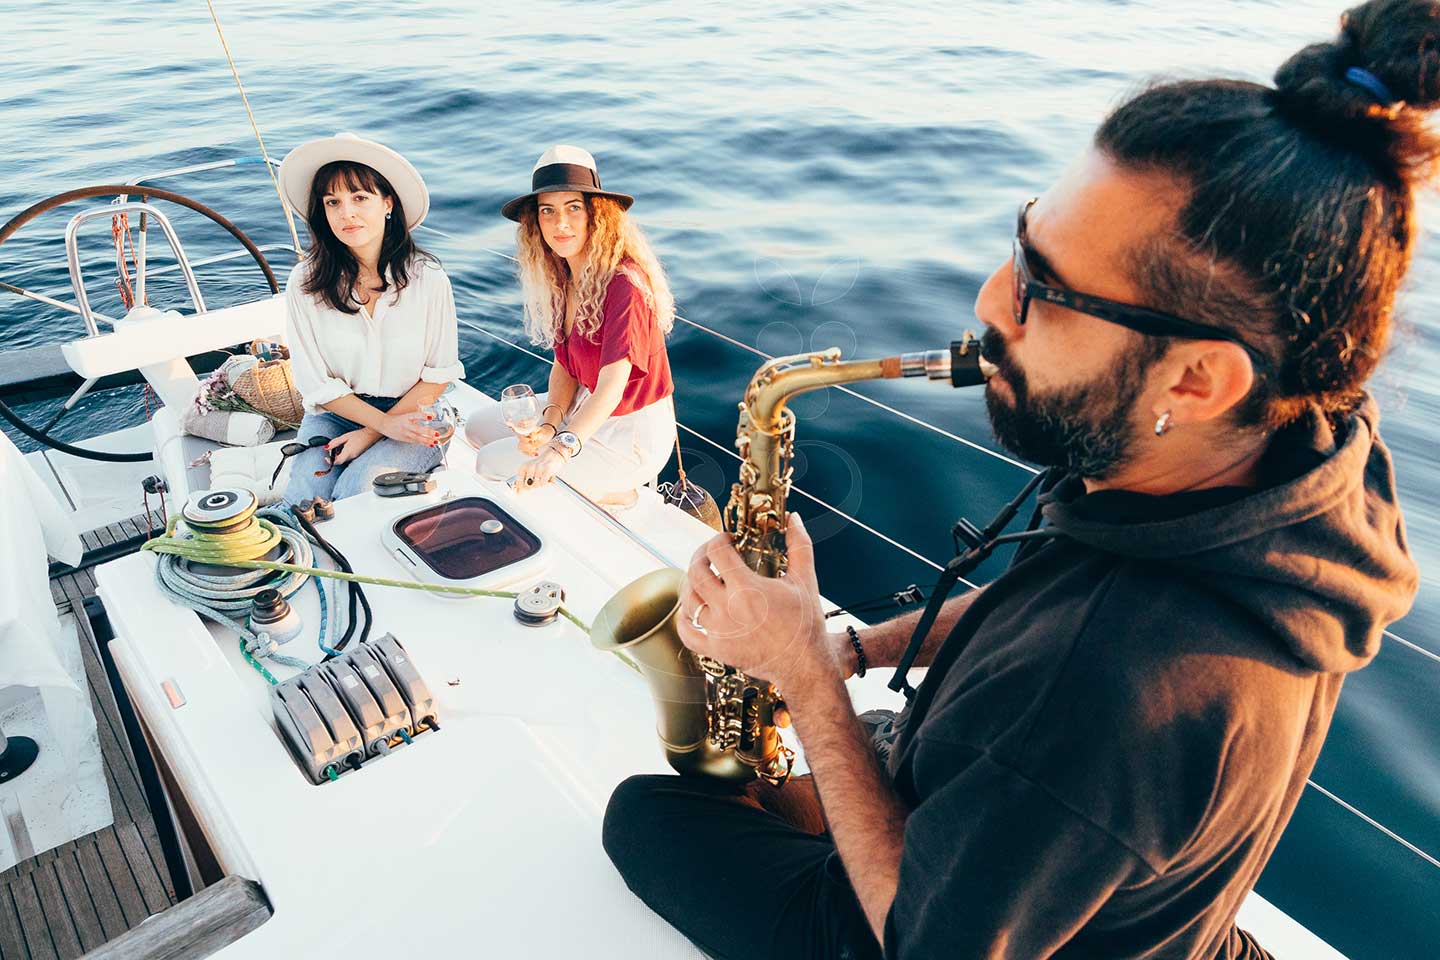 Private jazz & wine picnic on a private sailing boat in Istanbul by Vines and Pearls